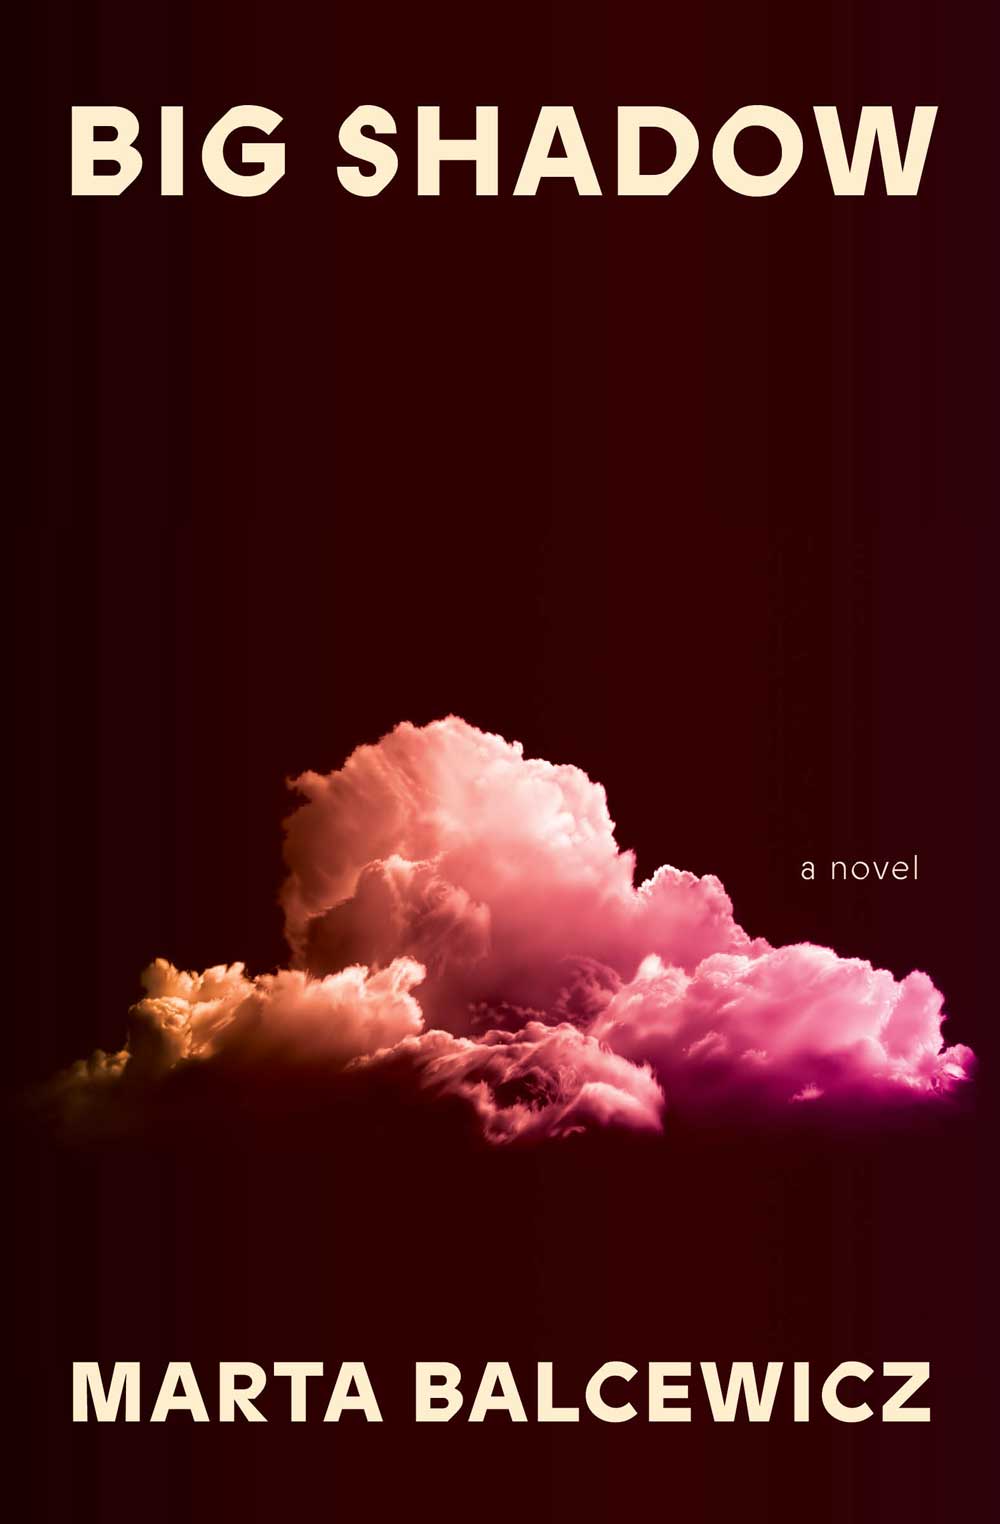 Book cover of Big Shadow with clouds in shades of pink on a dark background.